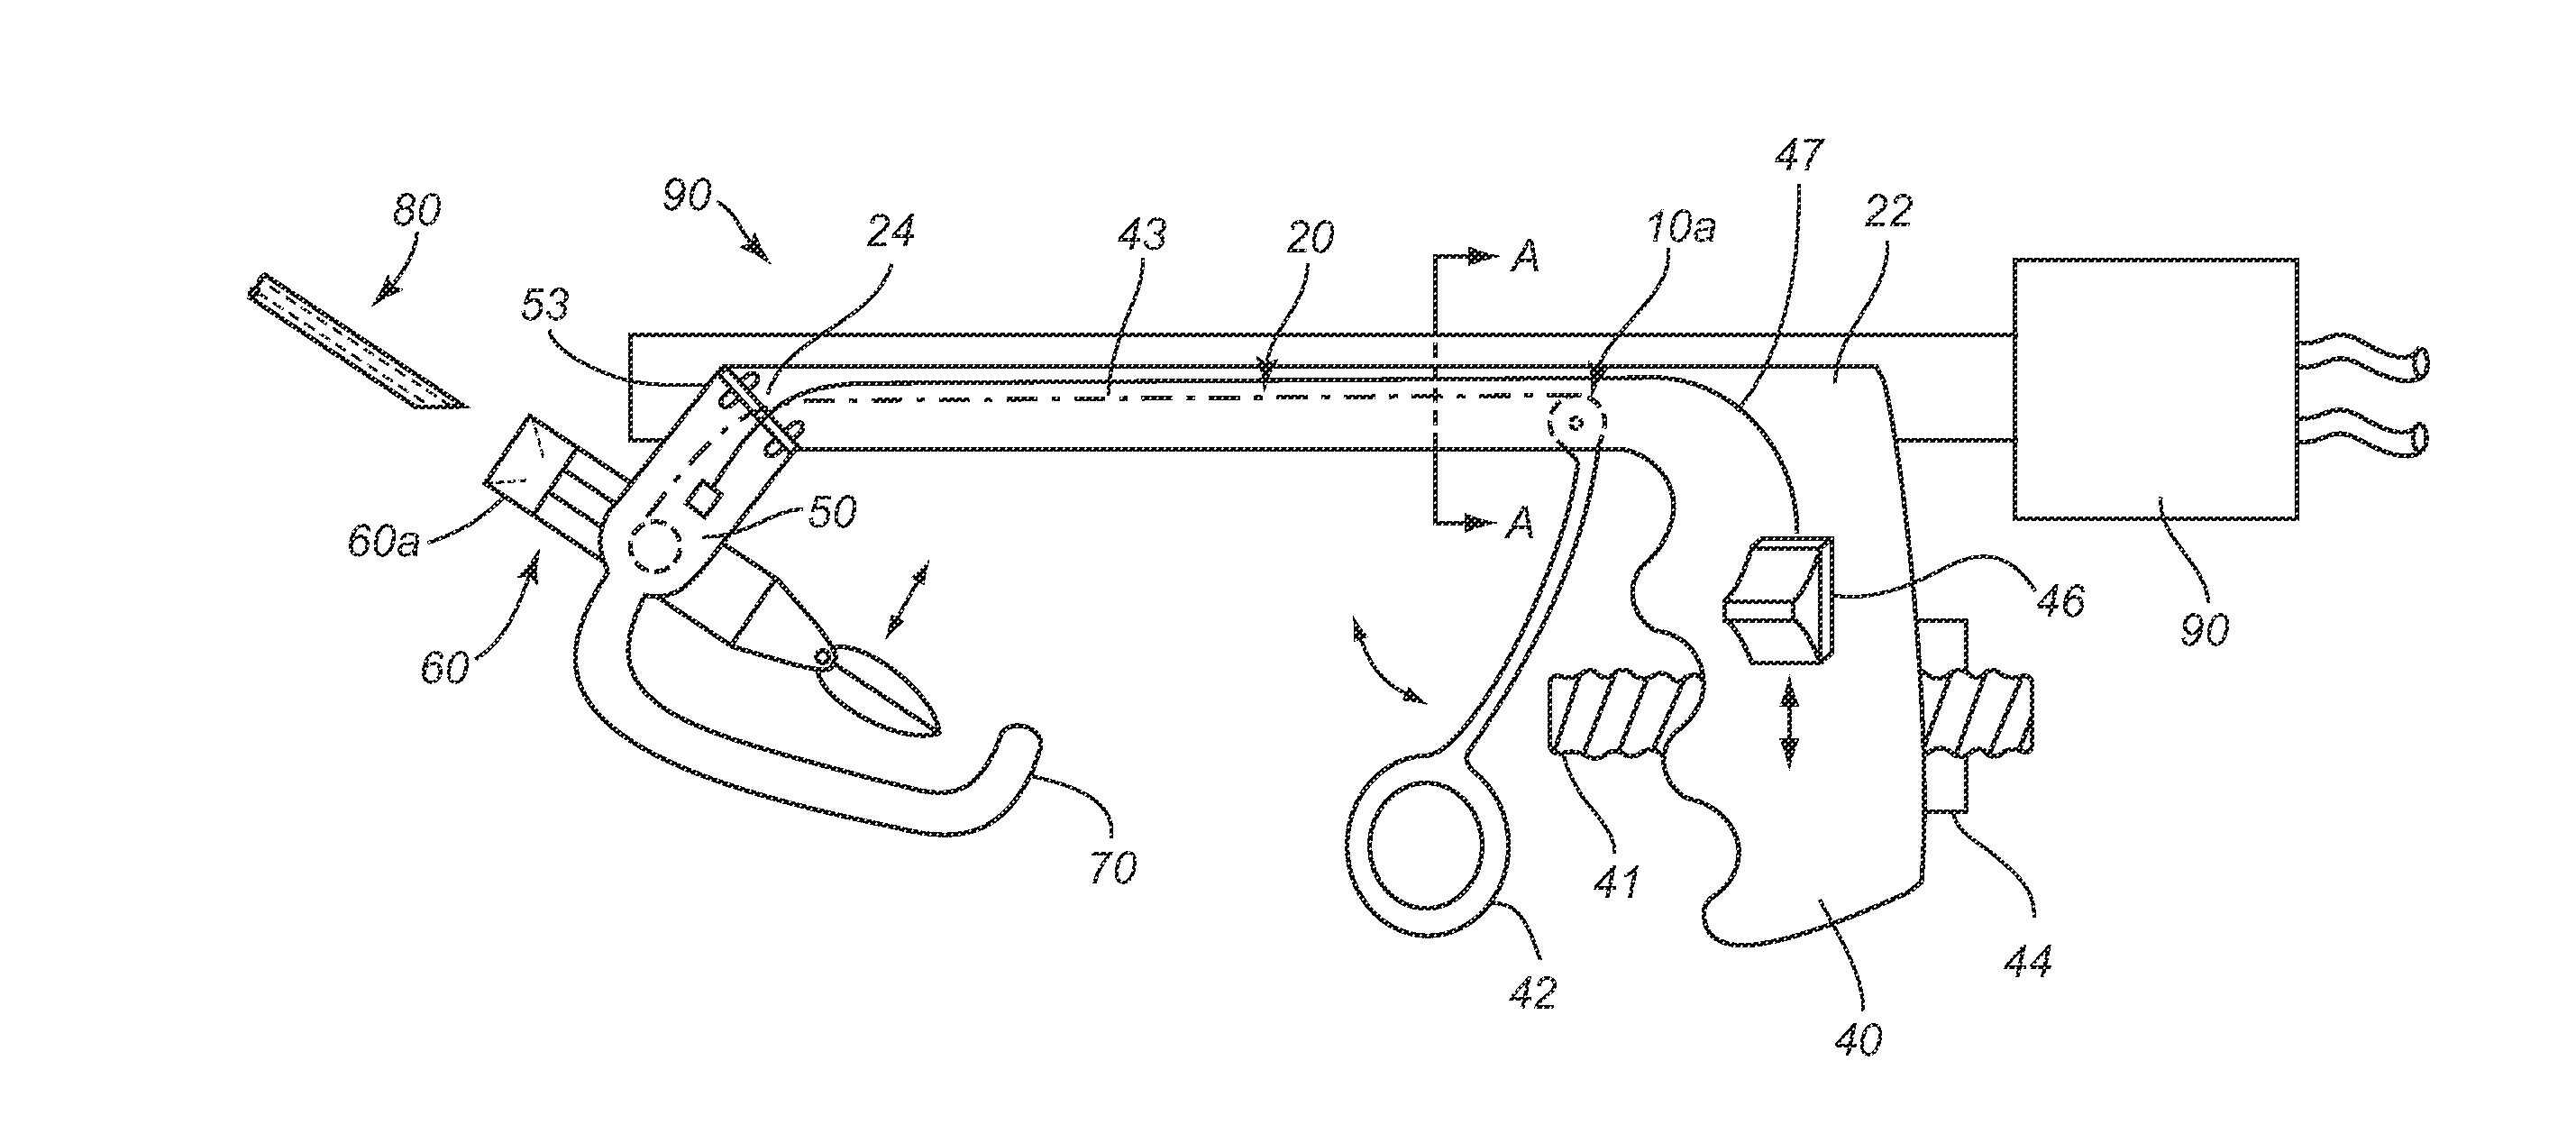 Apparatus, systems, and methods for performing laparoscopic surgery